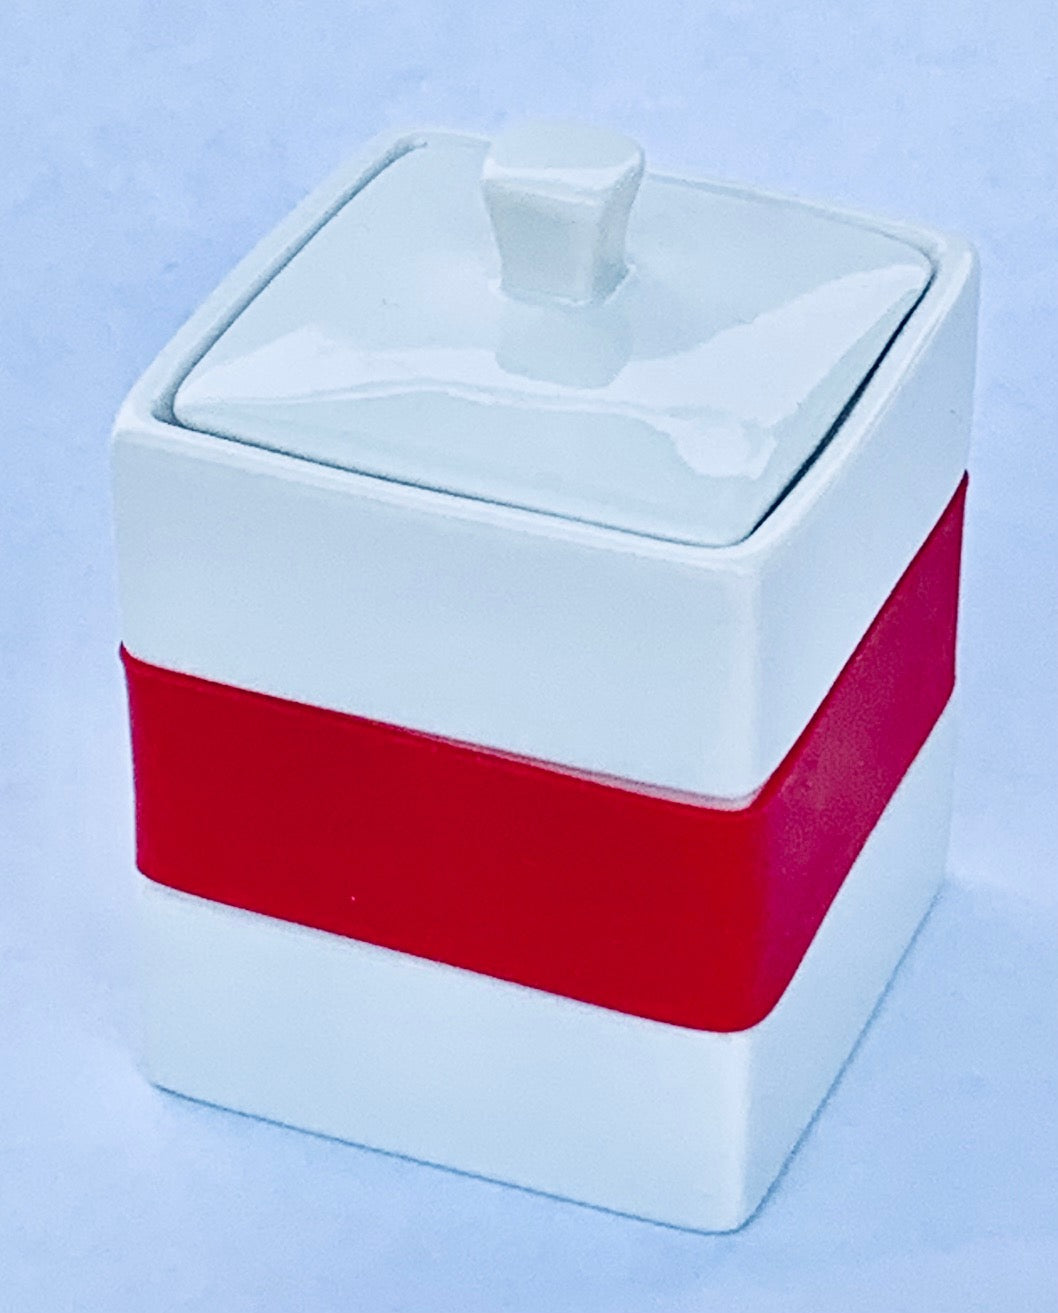 Cannister White Porcelain and Red band 7cm X 7cm X 10CM - Royal Gift